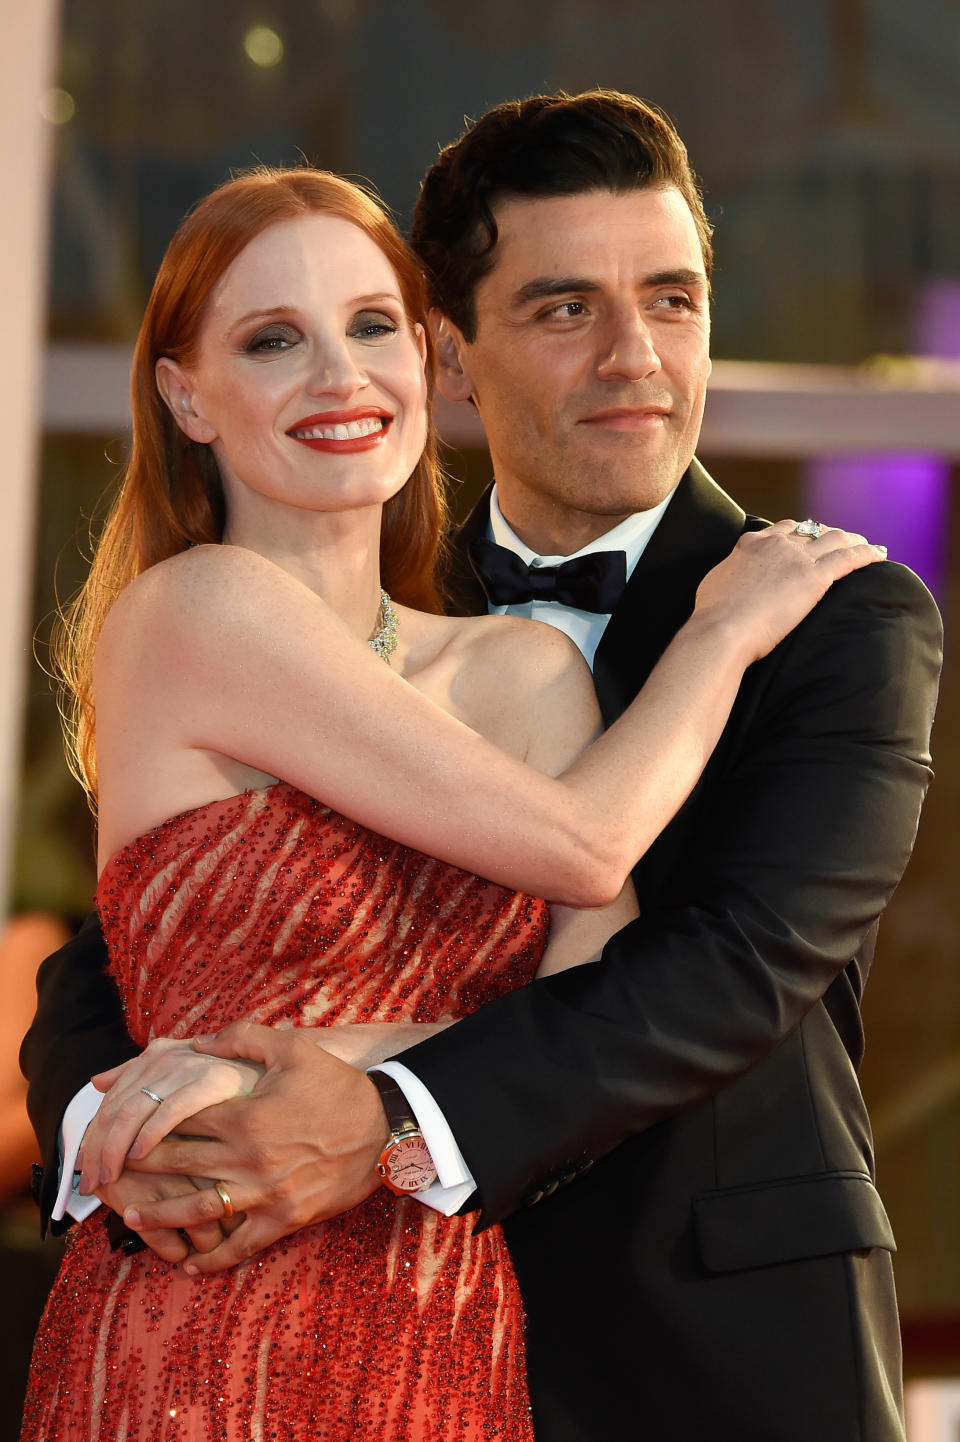 Isaac and Jessica Chastain at the premiere for "Scenes From a Marriage" in 2021